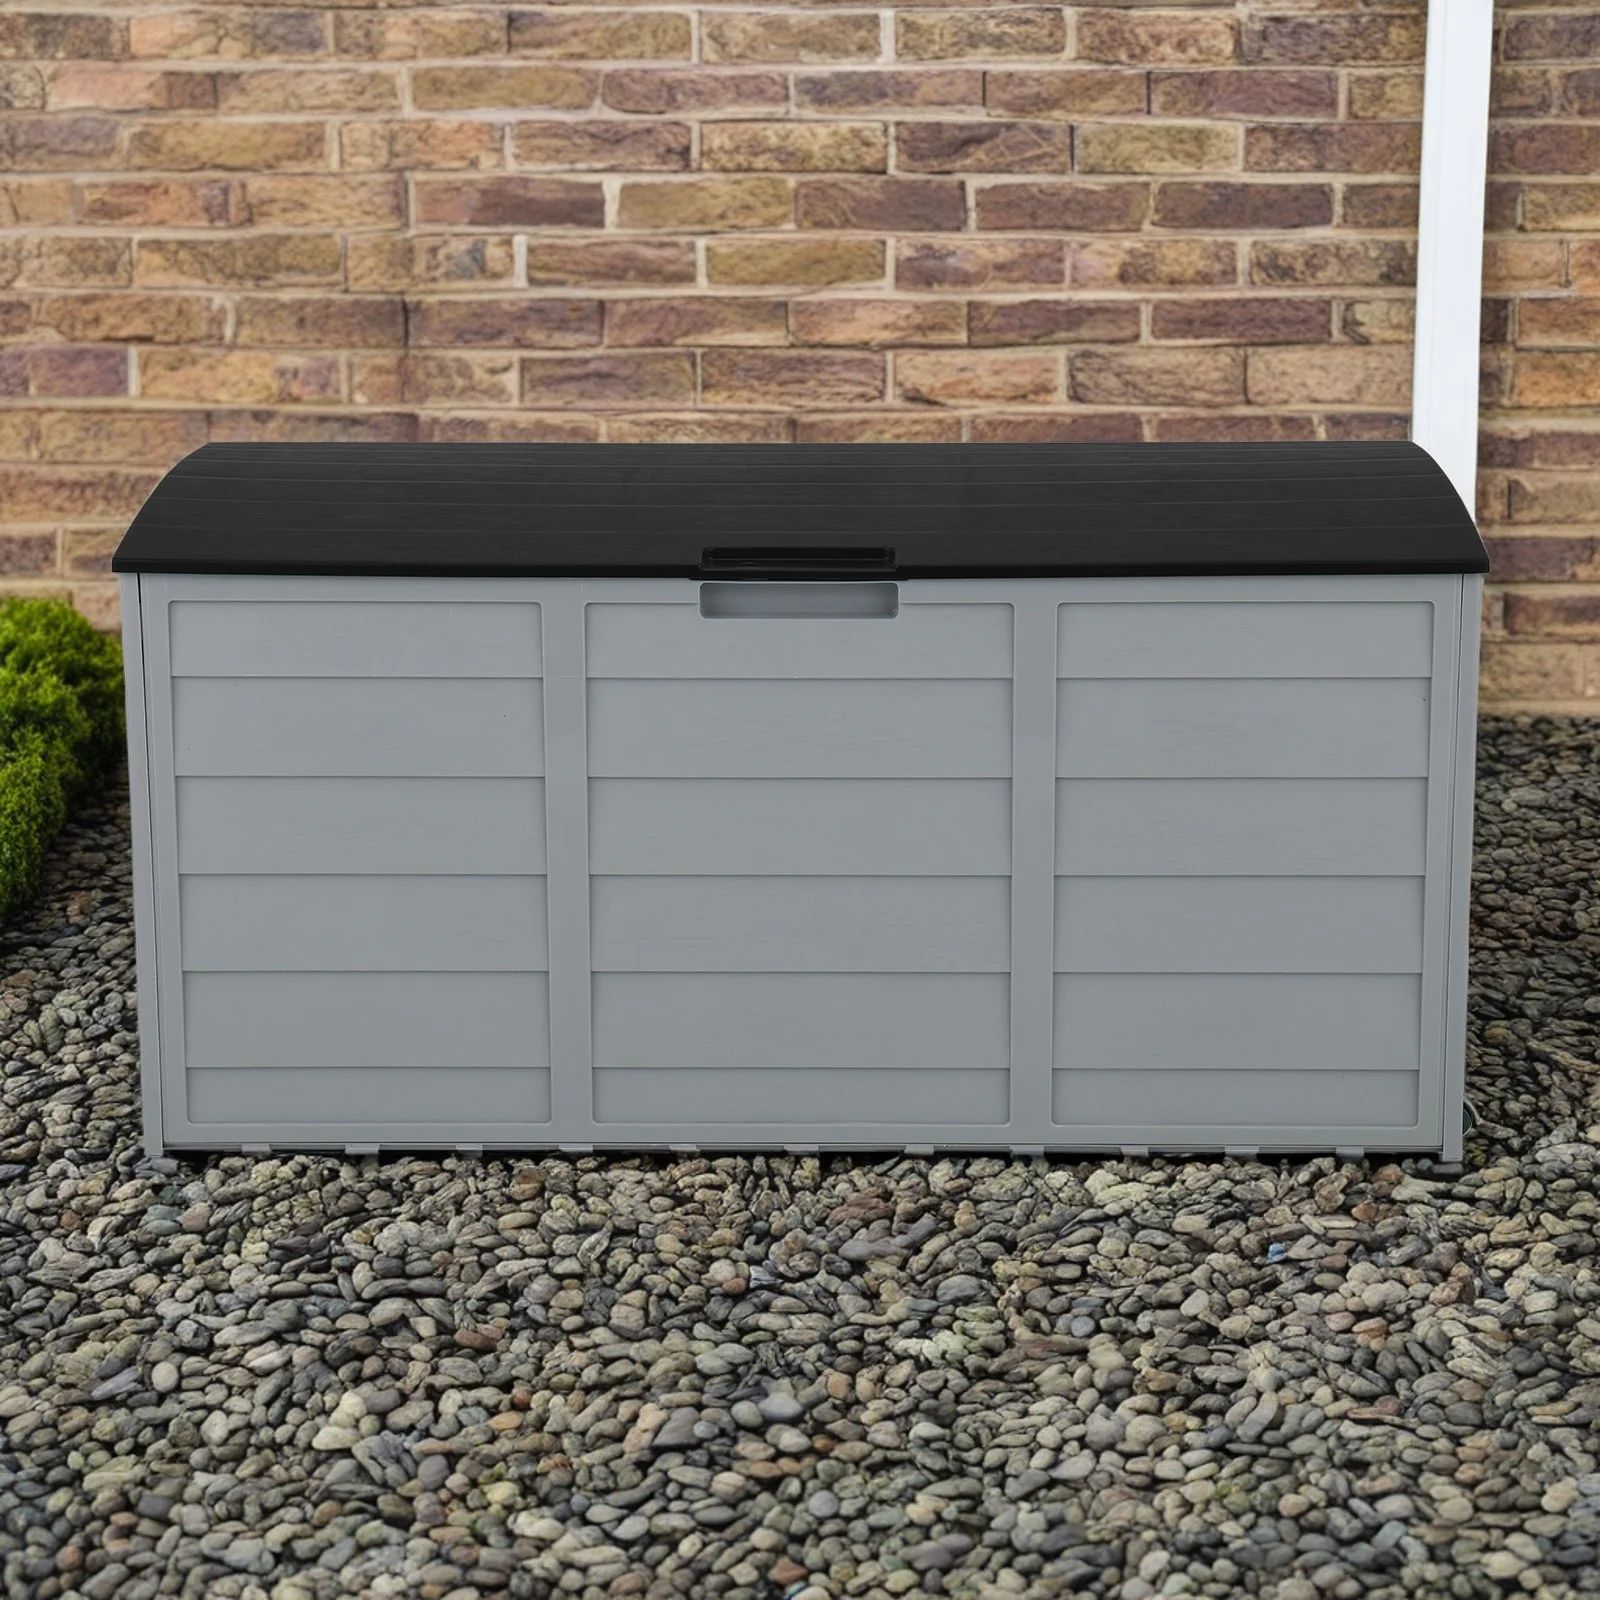 Canddidliike 75 Gallon Patio Deck Boxes with Lid, Container Bin Storage Box Grey Black | Walmart (US)